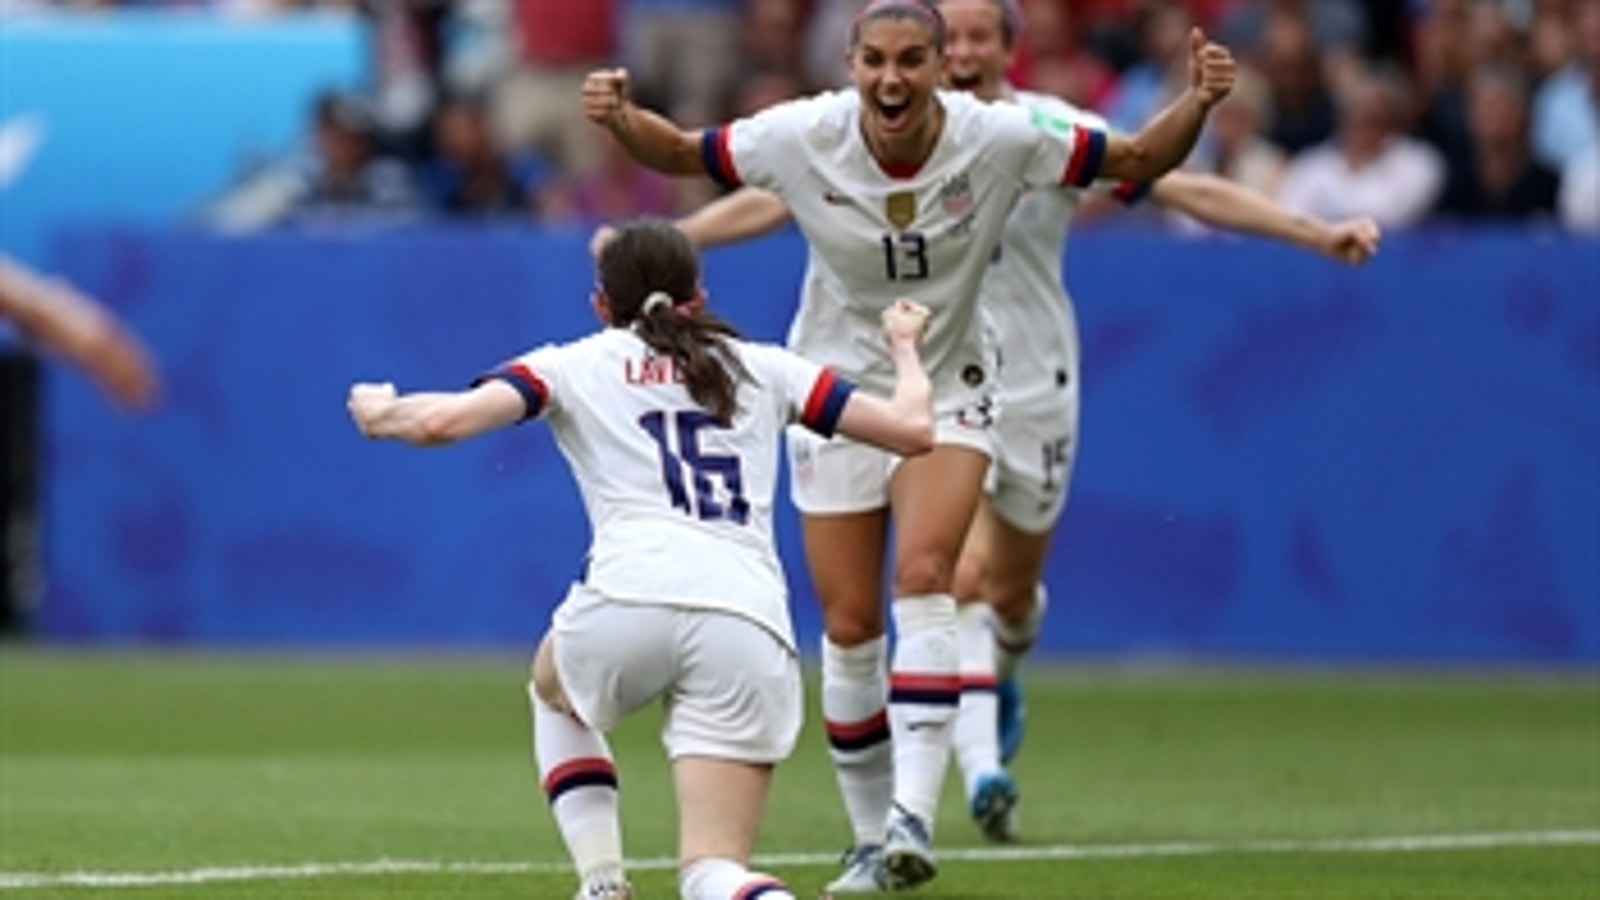 Rose Lavelle's goal seals the 2019 World Cup final for the USWNT